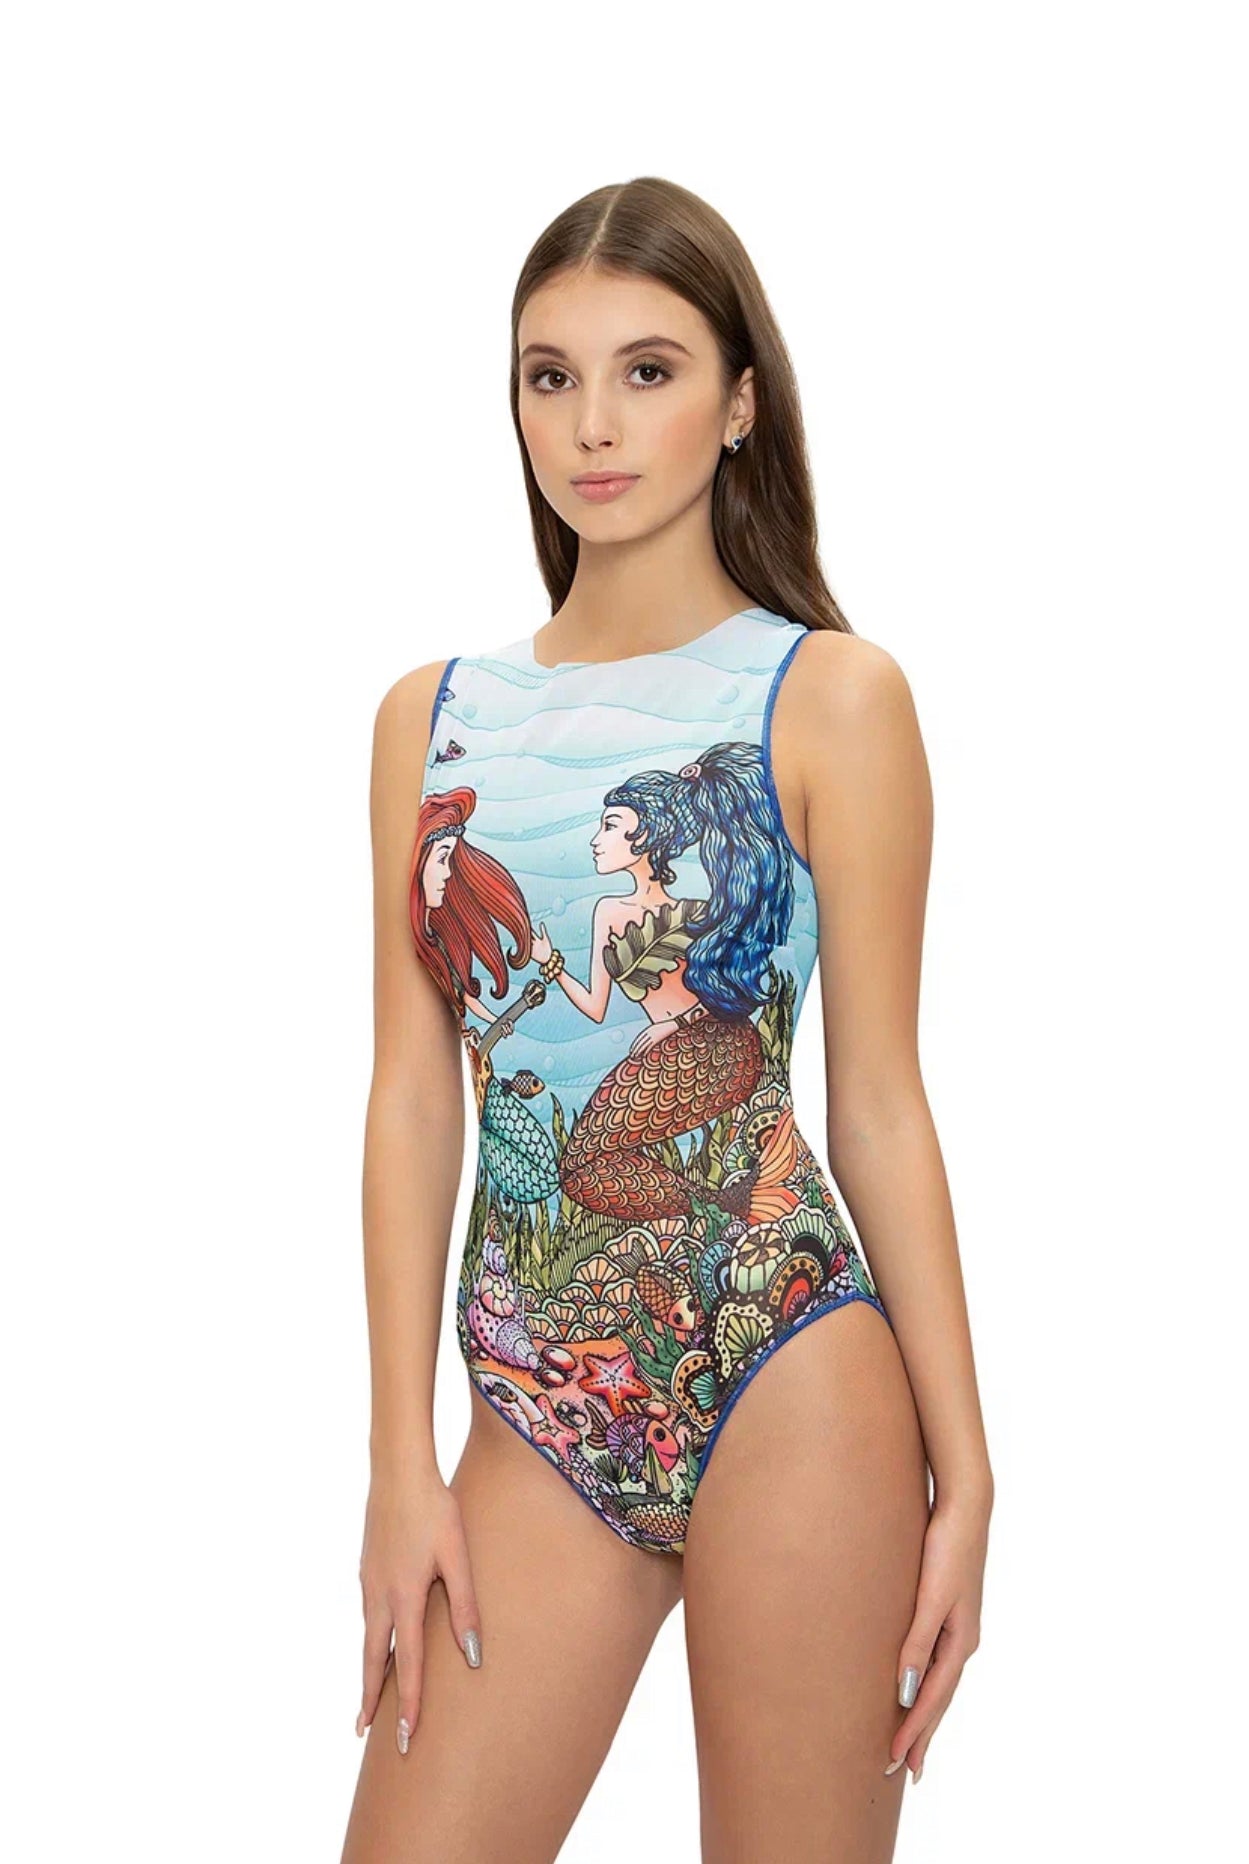 Explore our collection of tan-through swimsuits featuring a mesmerizing mermaid print. Stay protected with SPF35 in this sleeveless swimsuit. Experience classic luxury and innovative design. Shop now!